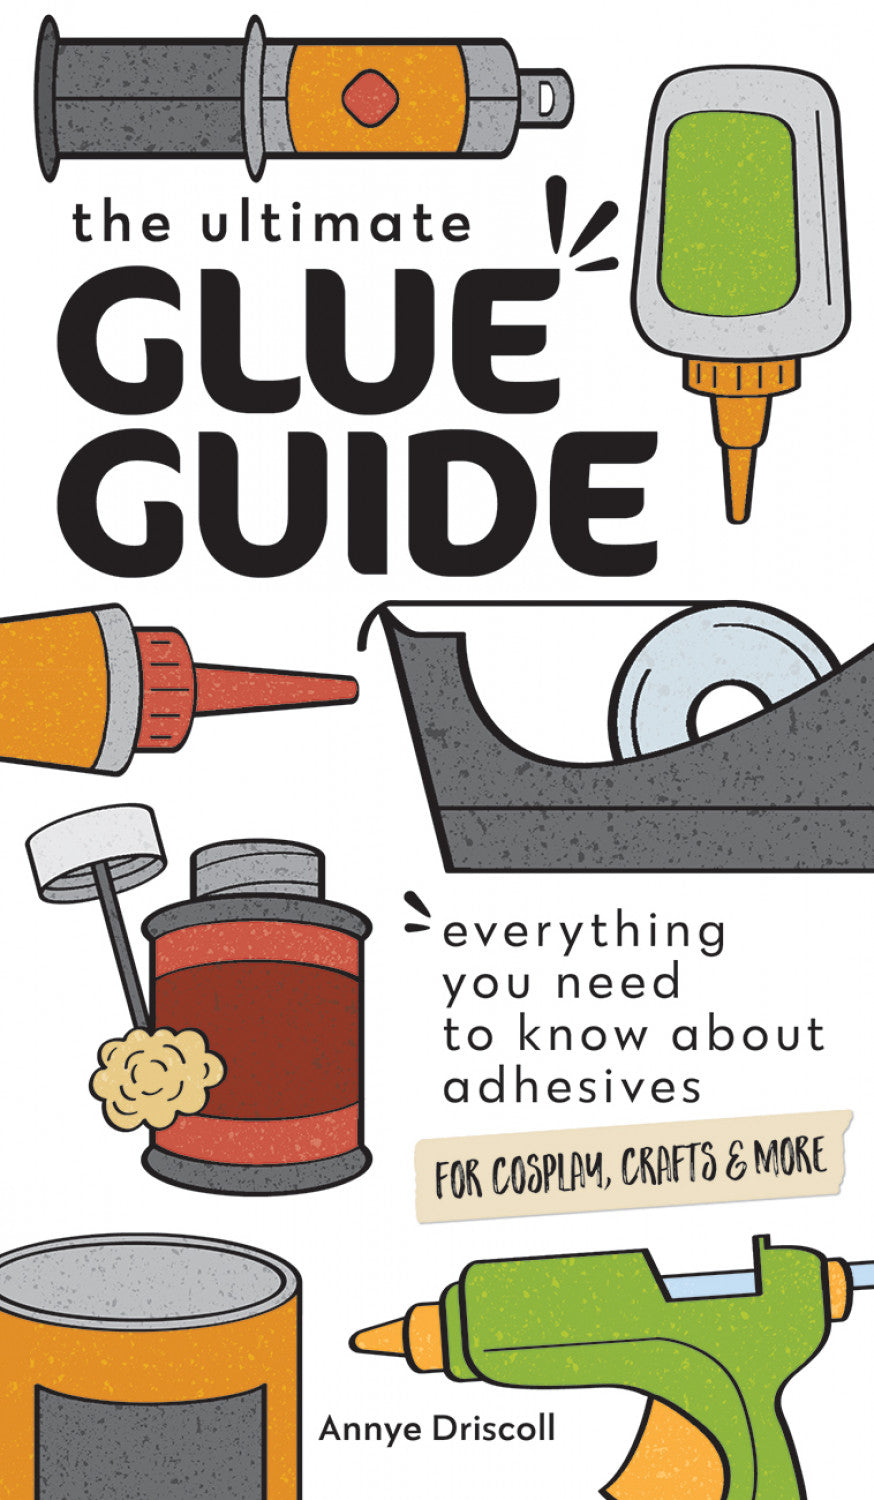 The Ultimate Glue Guide Book by Annye Driscoll for FanPowered Press